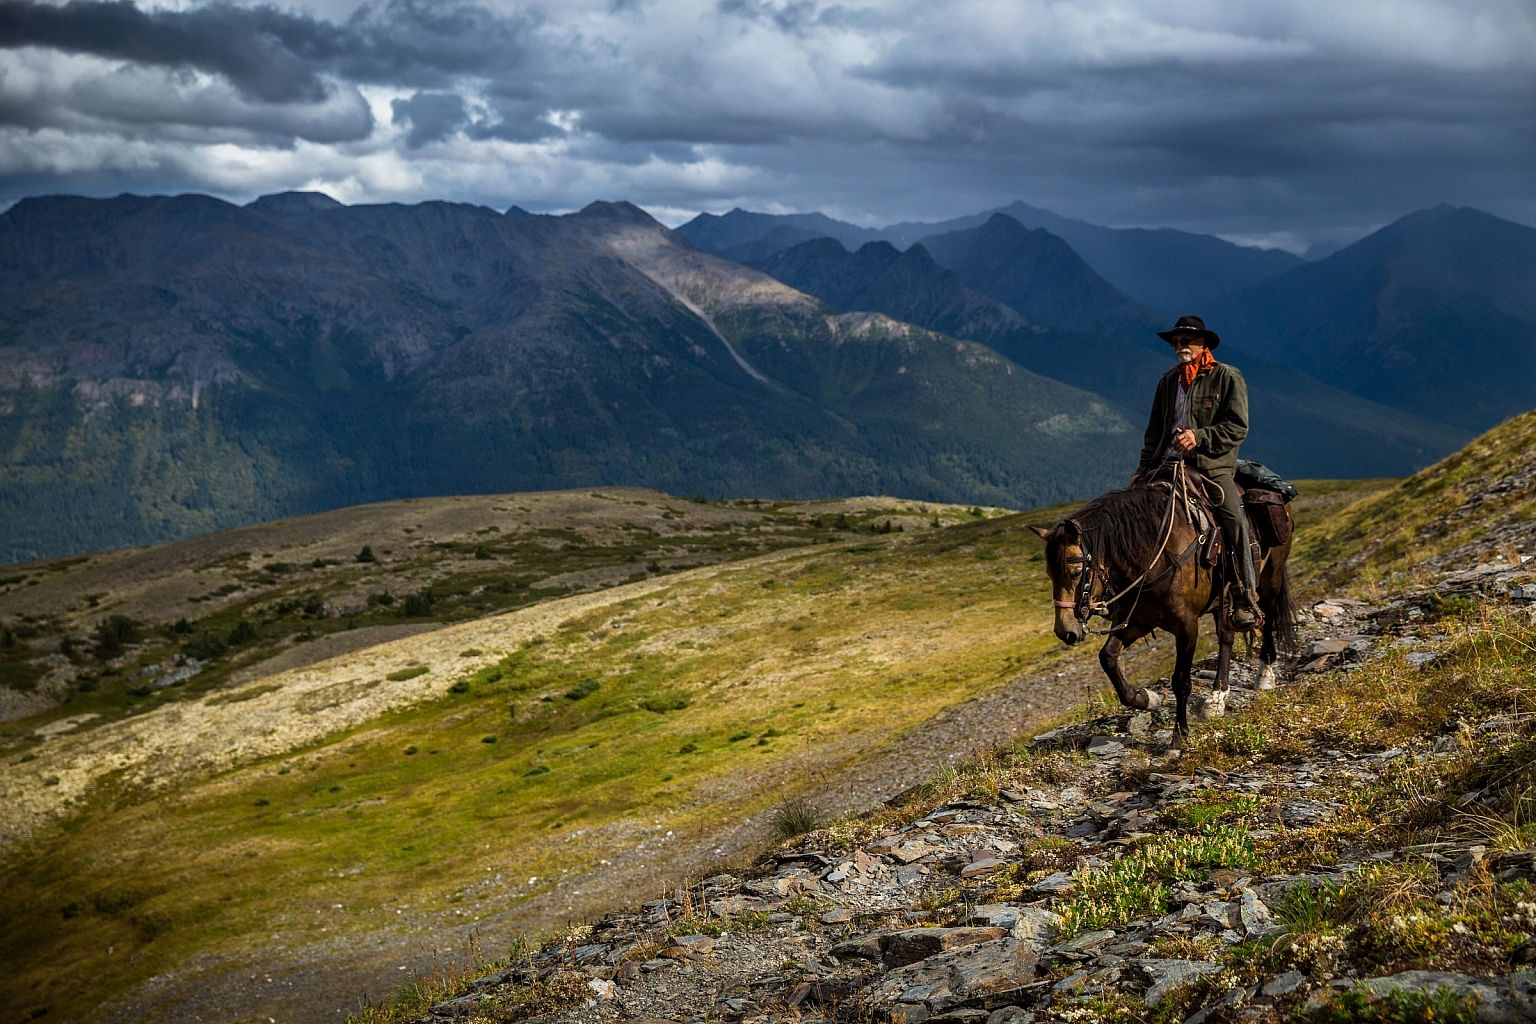 A lone horseback rider traverses the rugged countryside with rocks, sparse foliage and mountains as far as the eye can see.